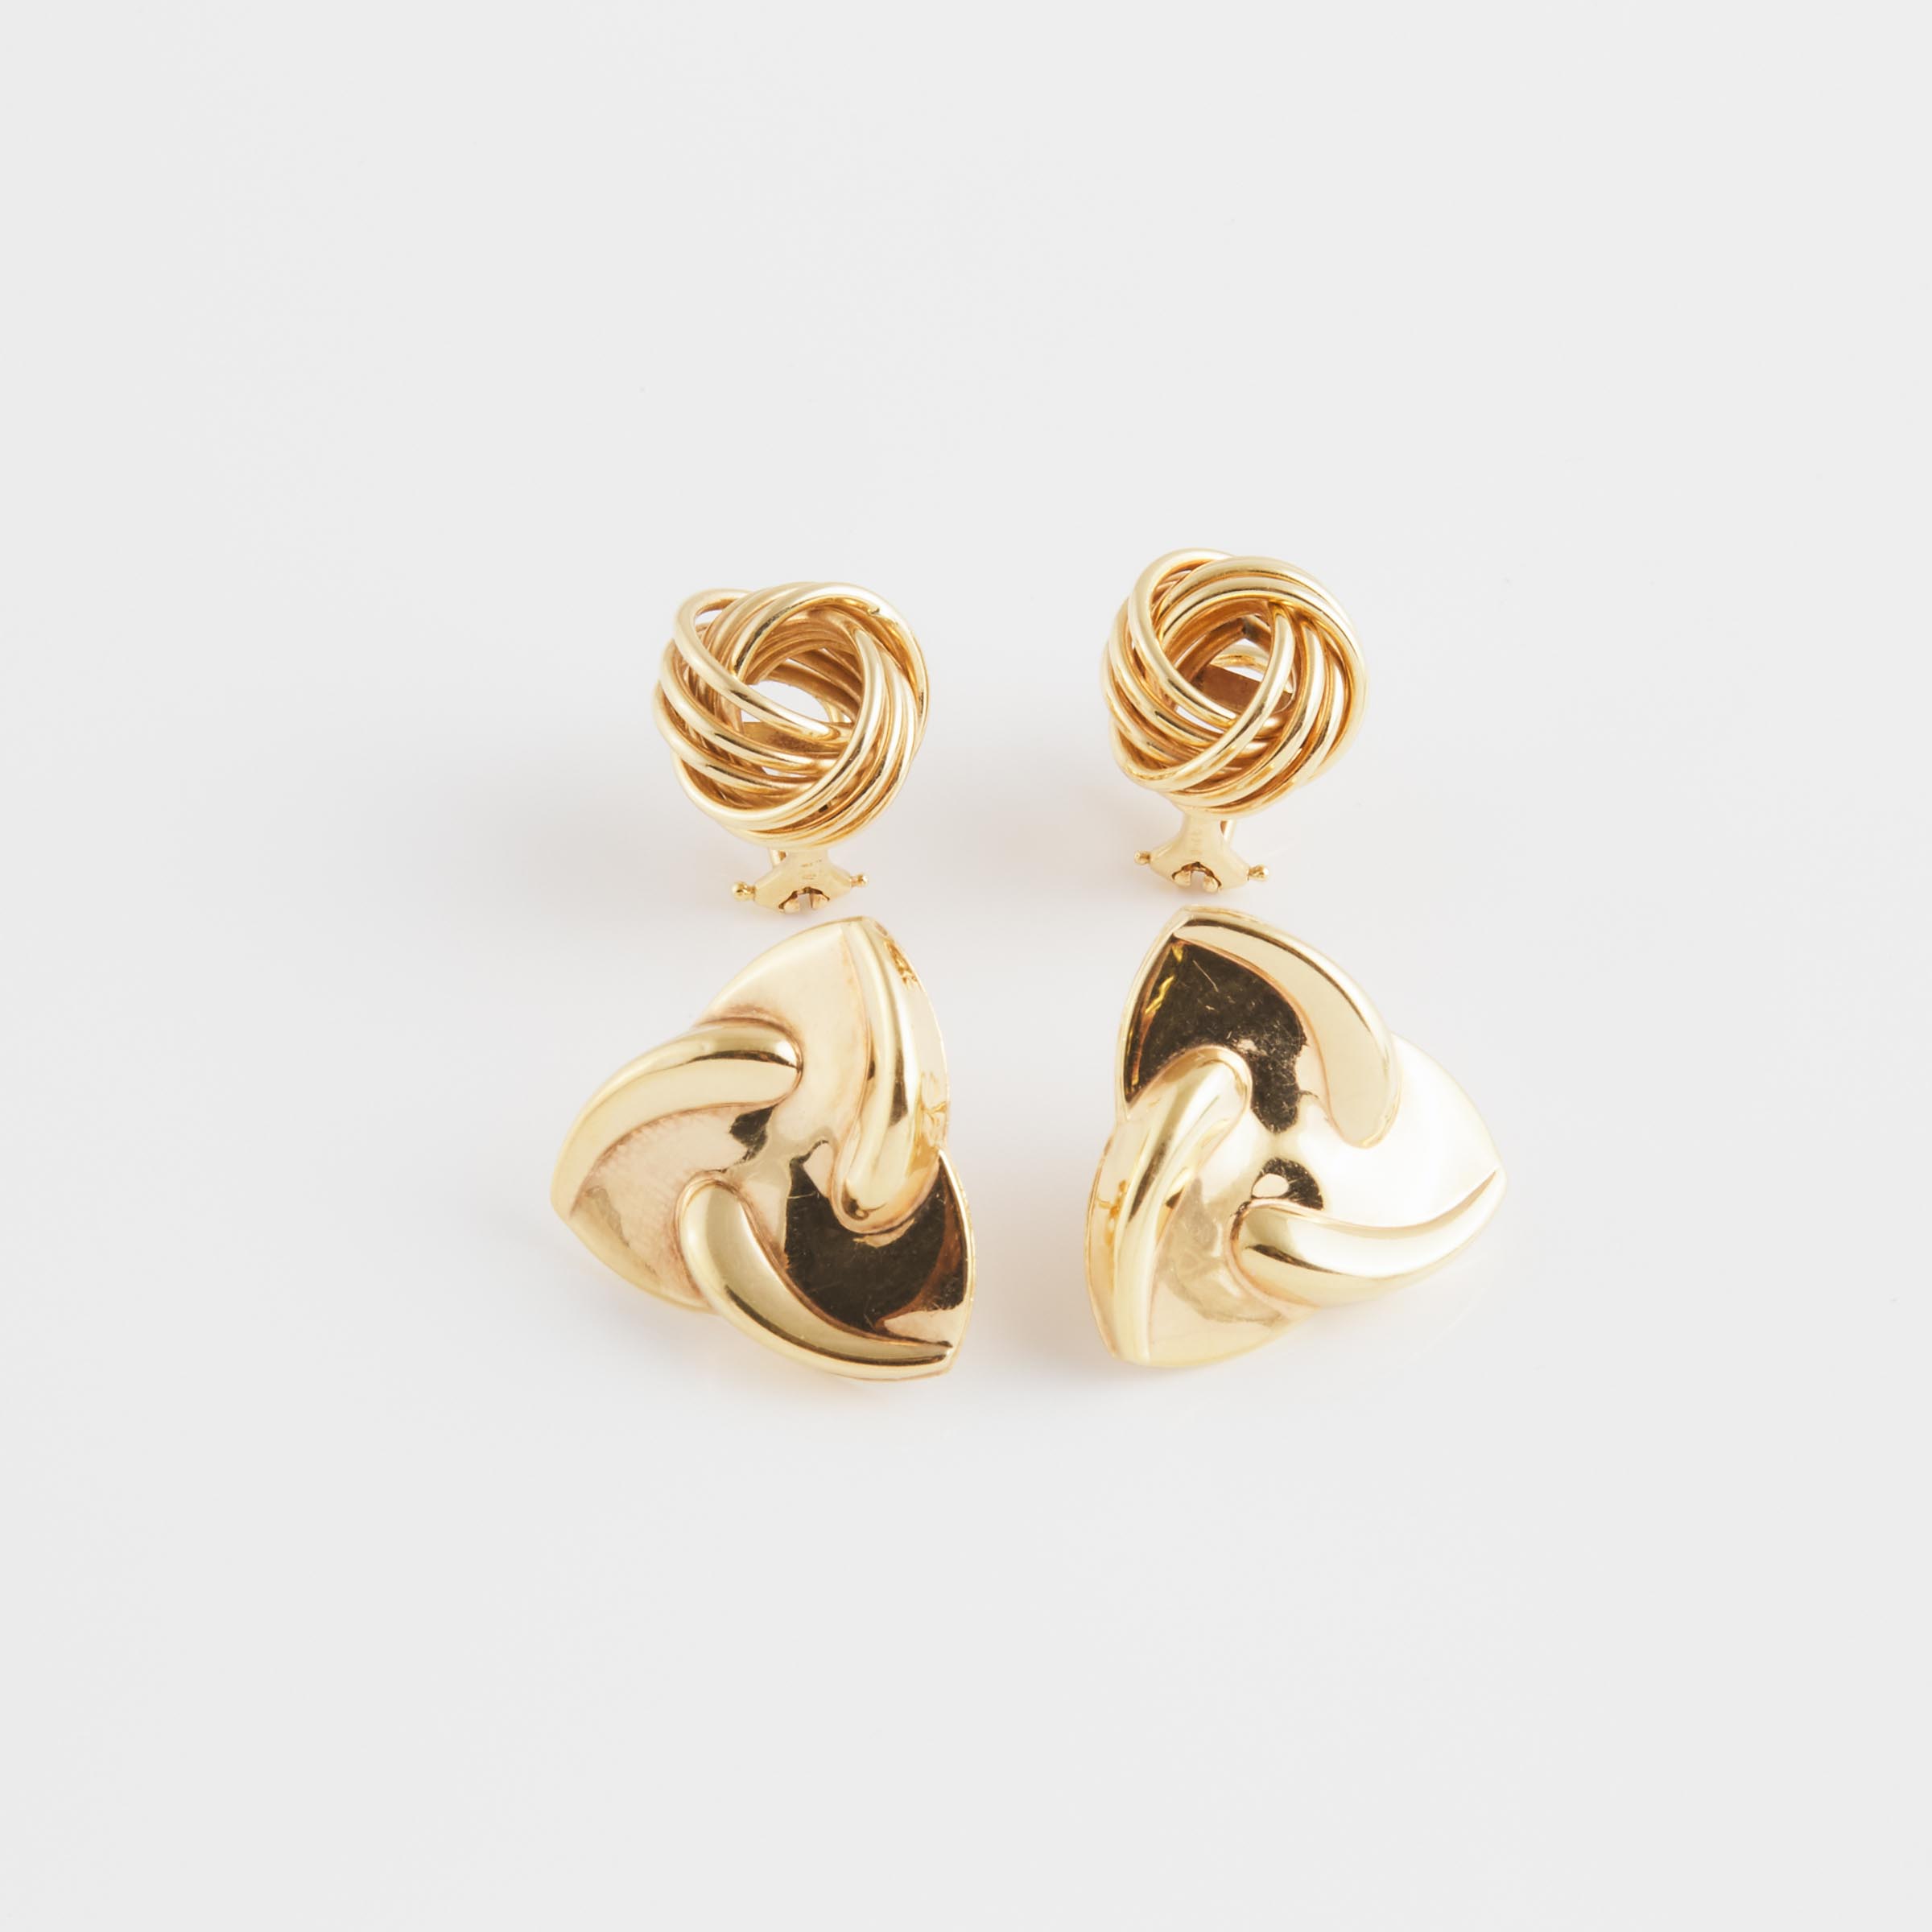 2 Pairs Of 14k Yellow Gold Earrings